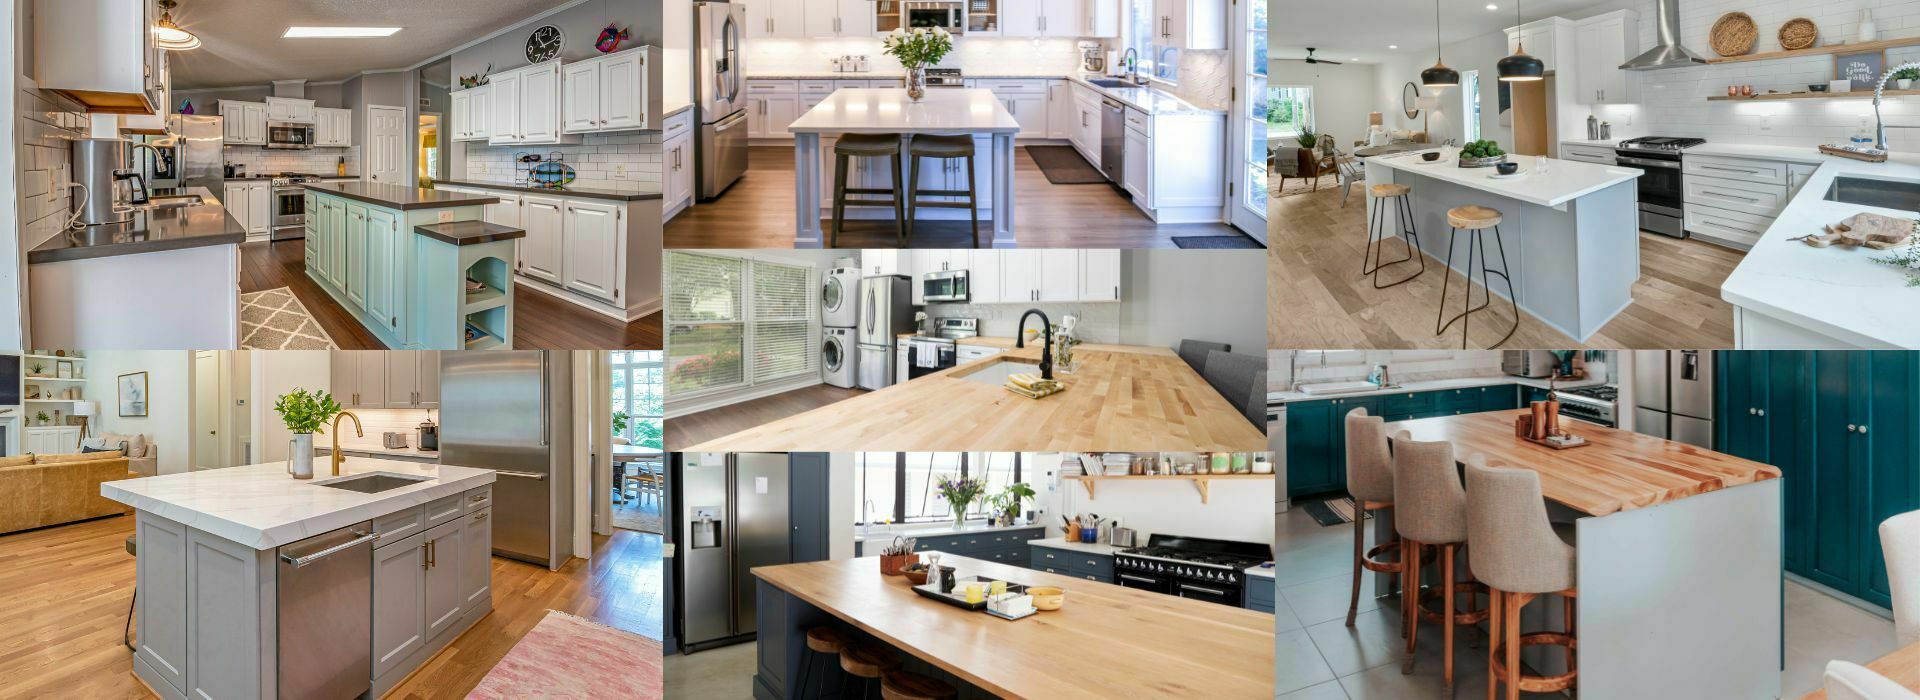 collage of kitchen islands and slogan with Made in the USA